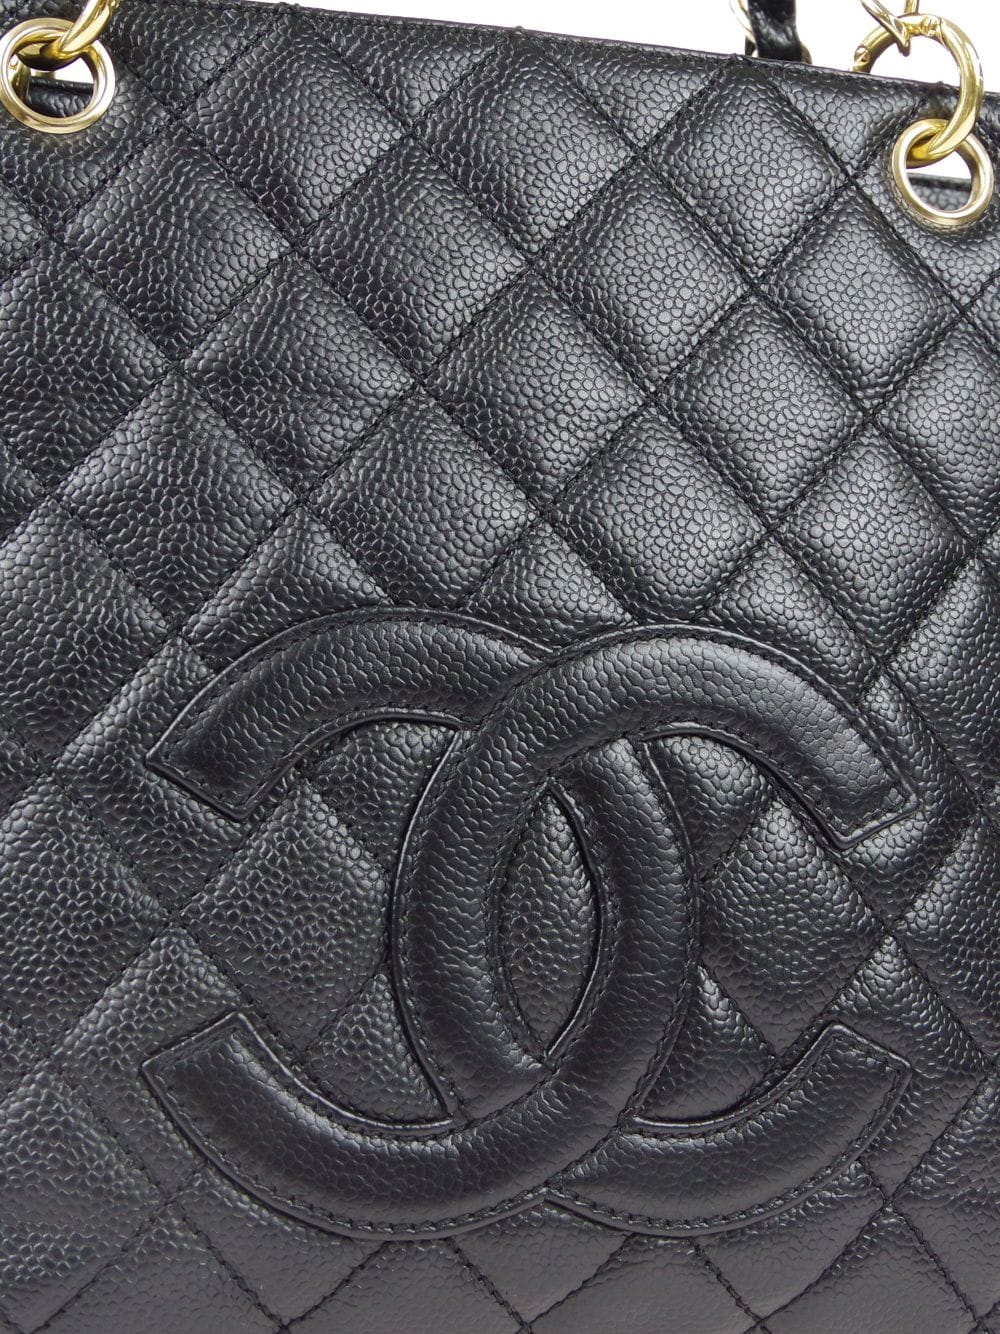 Chanel Pst (Petite Shopping Tote) Black Leather Tote Bag (Pre-Owned) –  Bluefly